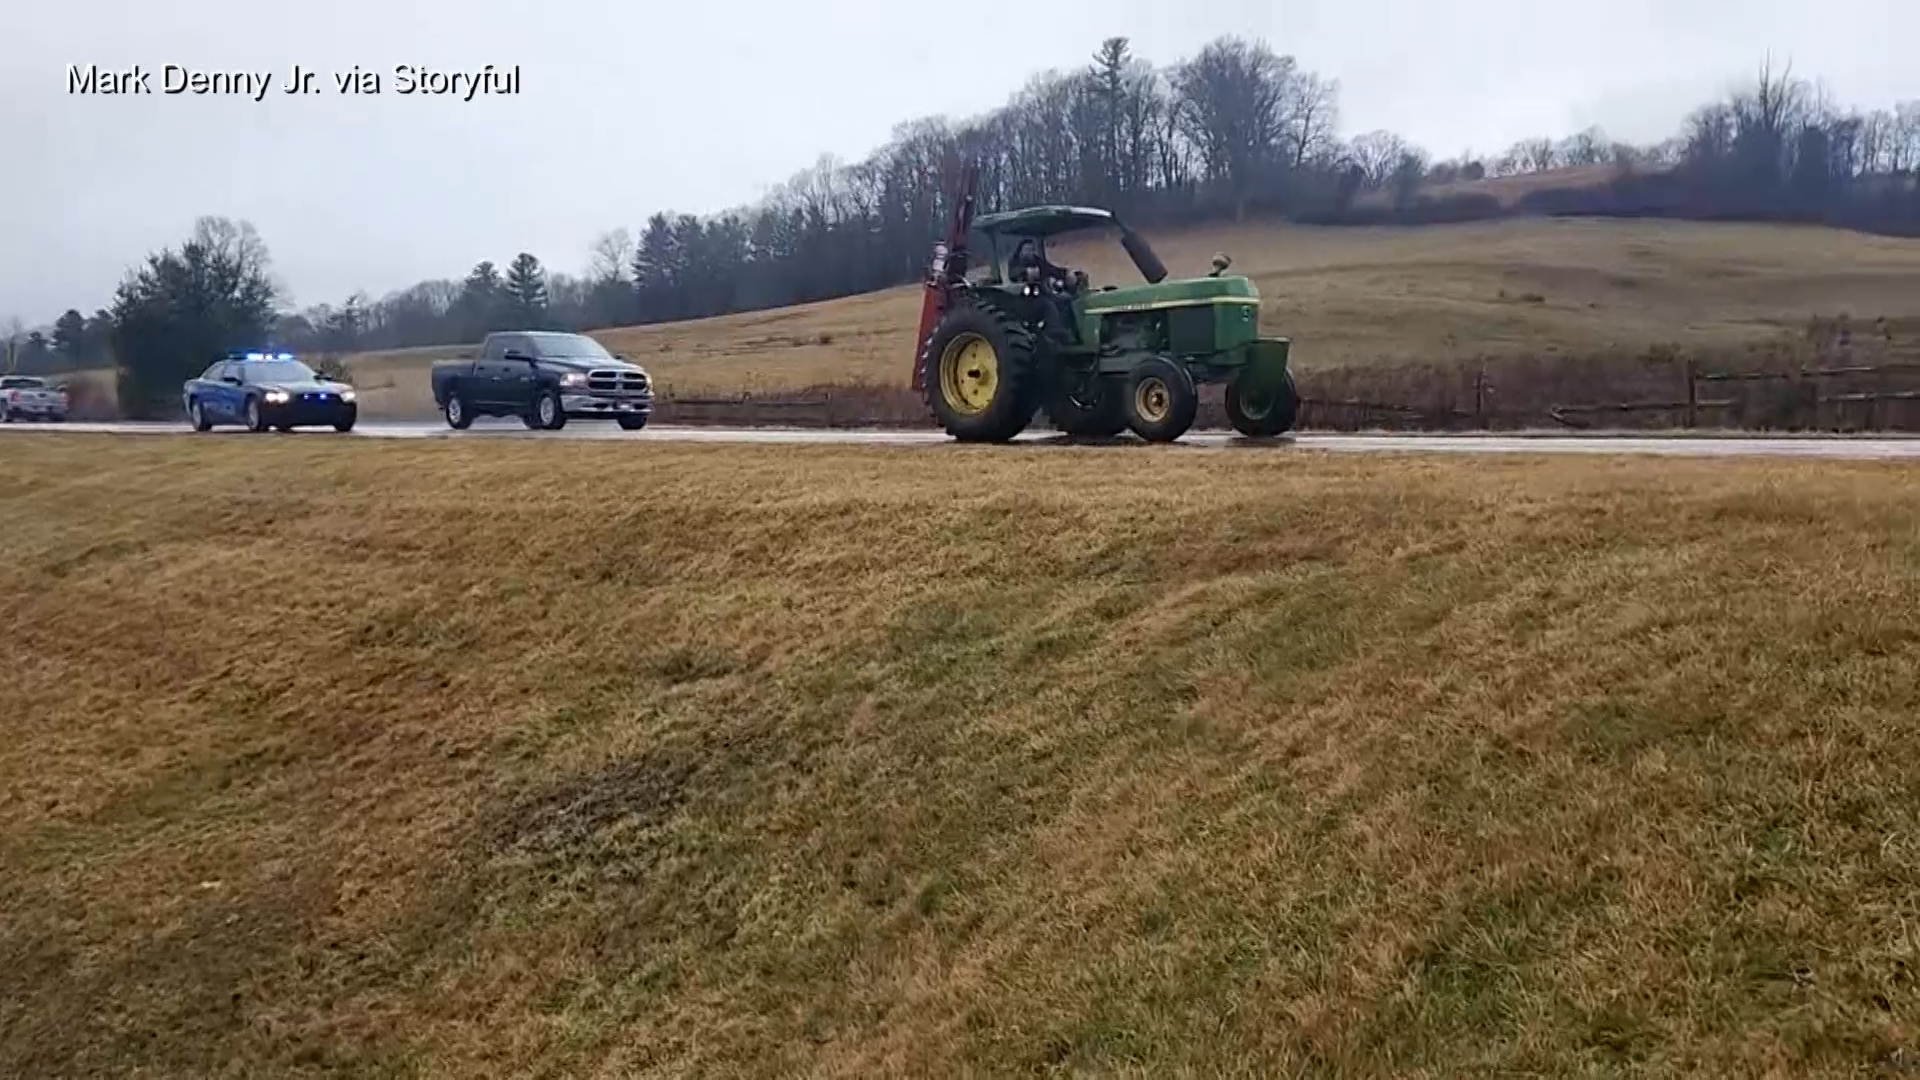 Video: Bizarre slow-speed police chase as man drove stolen tractor, police say